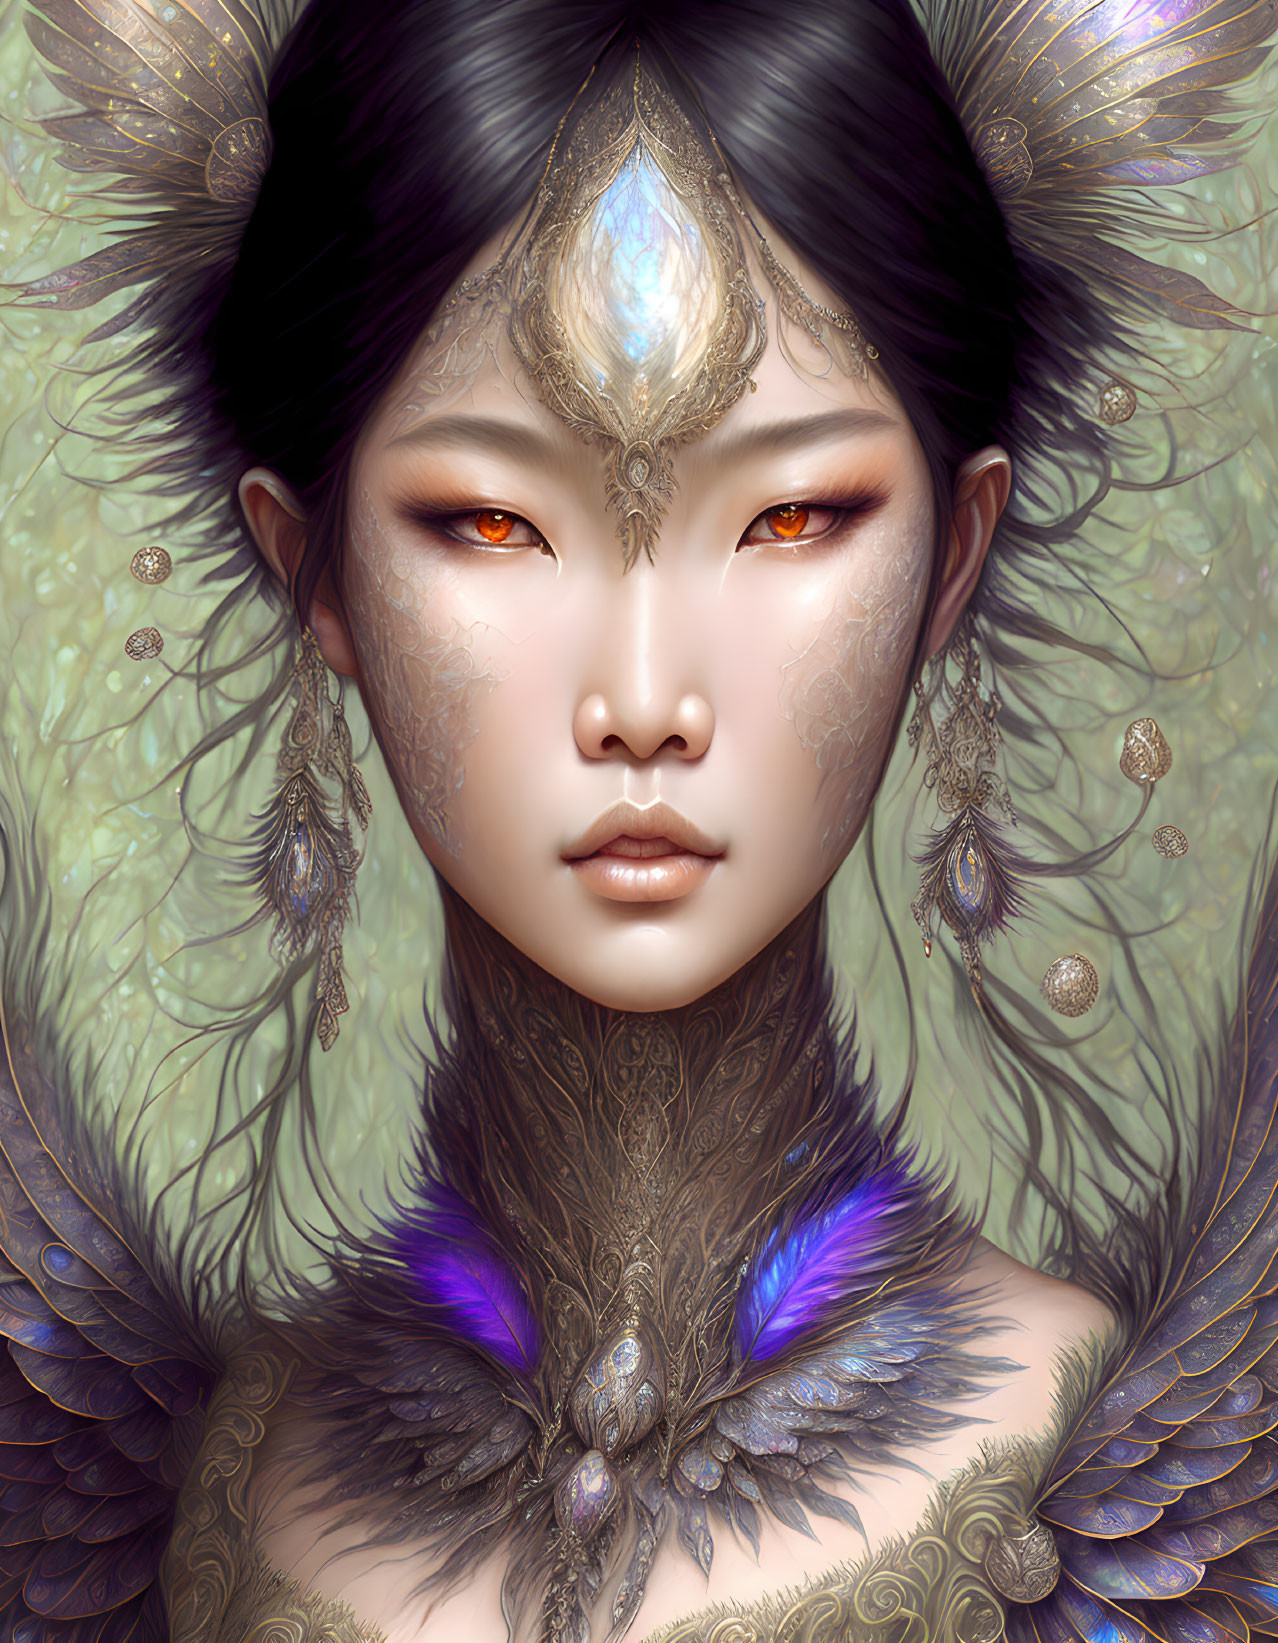 Fantasy makeup woman with golden jewelry and feathered adornments